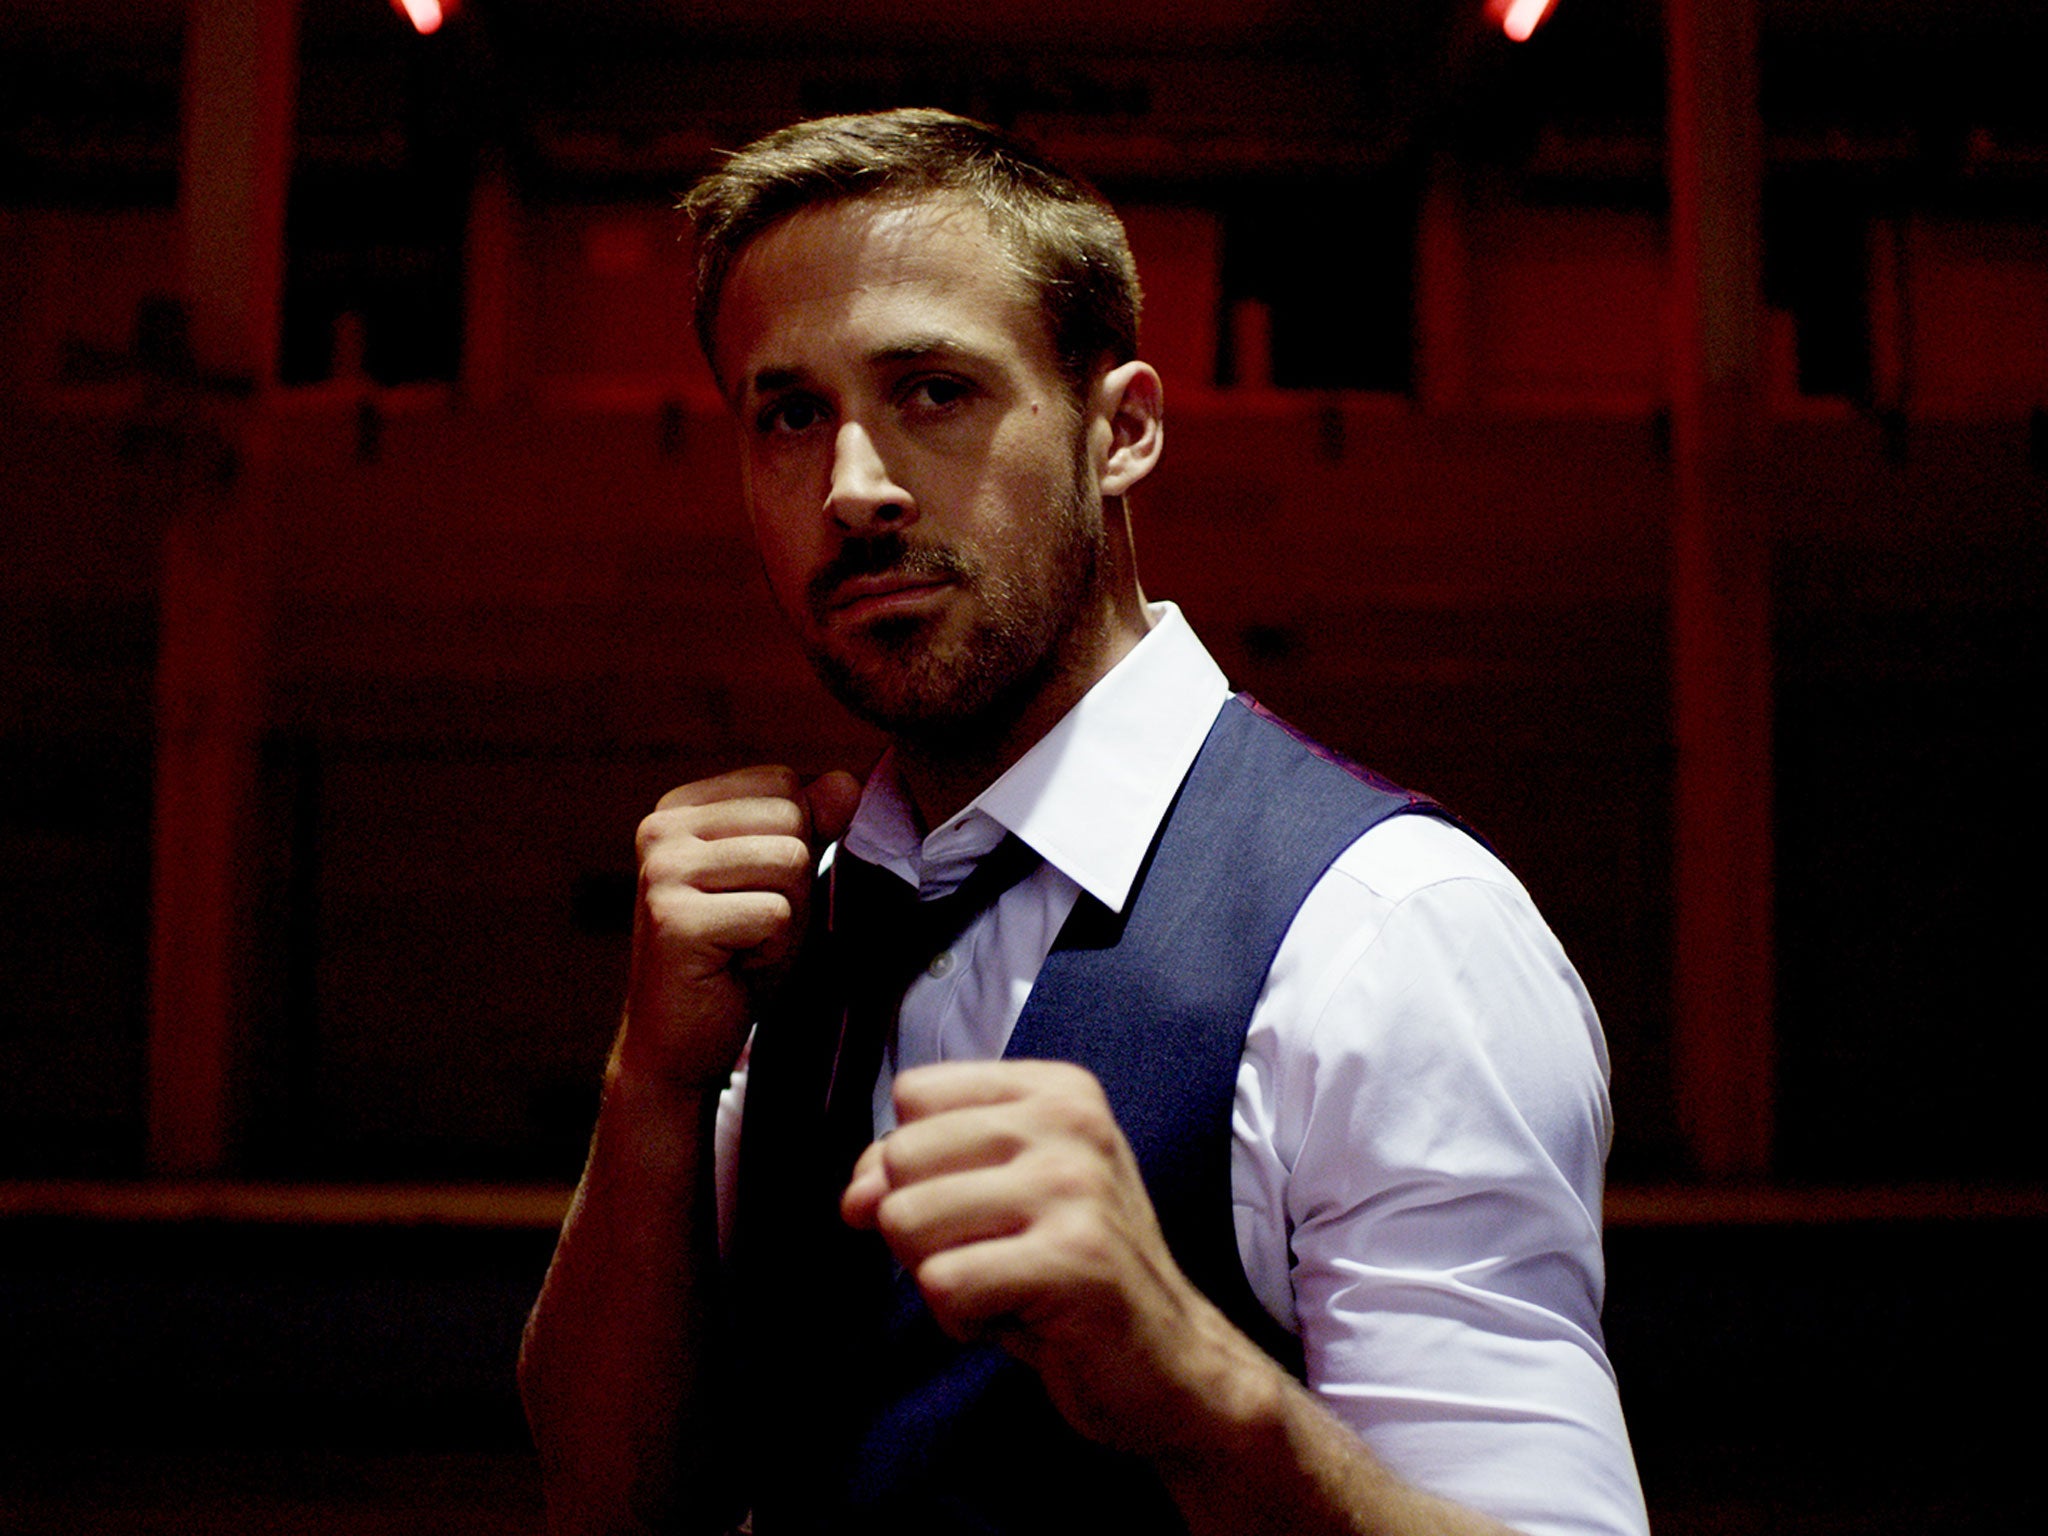 Ryan Gosling in Only God Forgives, directed by Nicolas Winding Refn. The film received mixed reviews on its release.